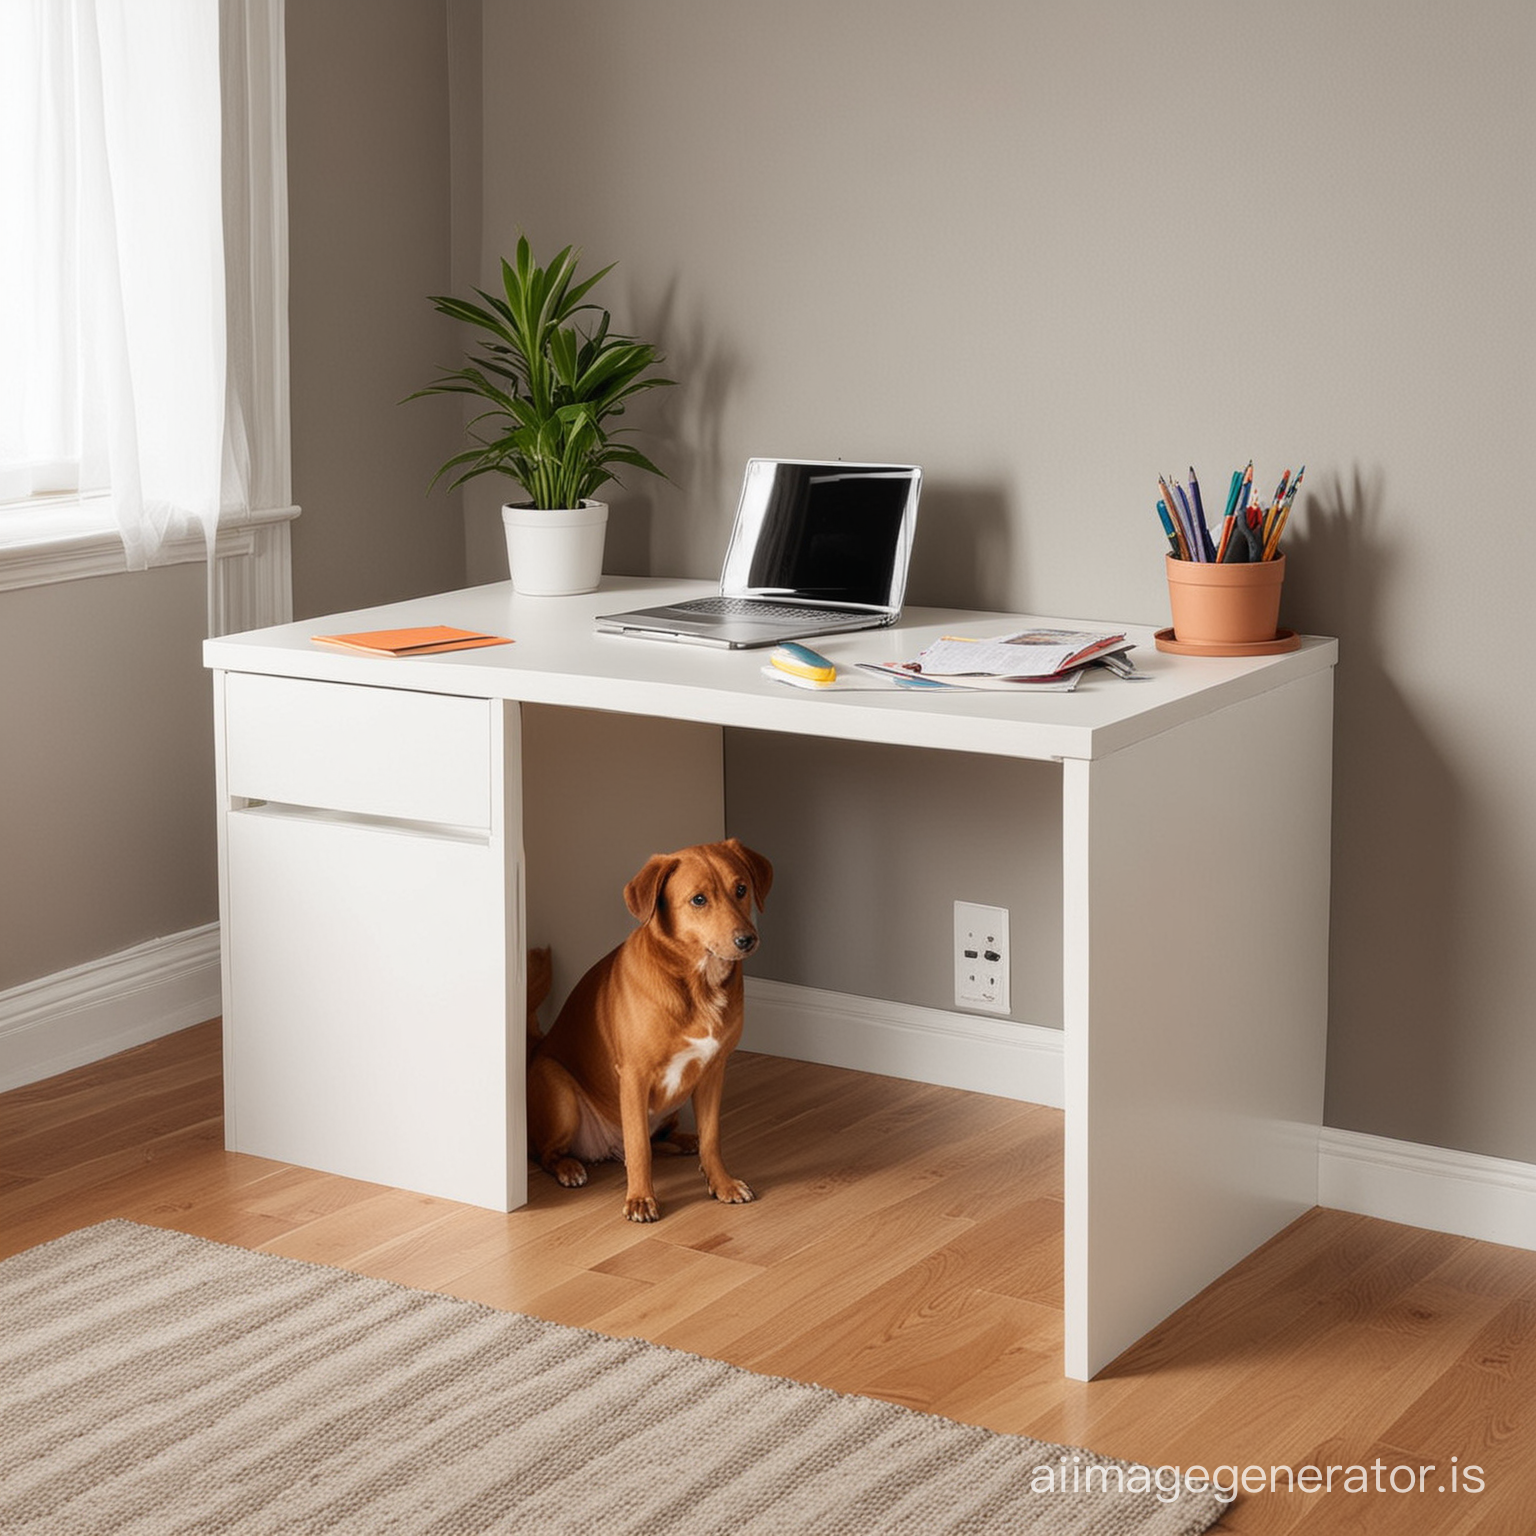 A desk which a hole for pets 